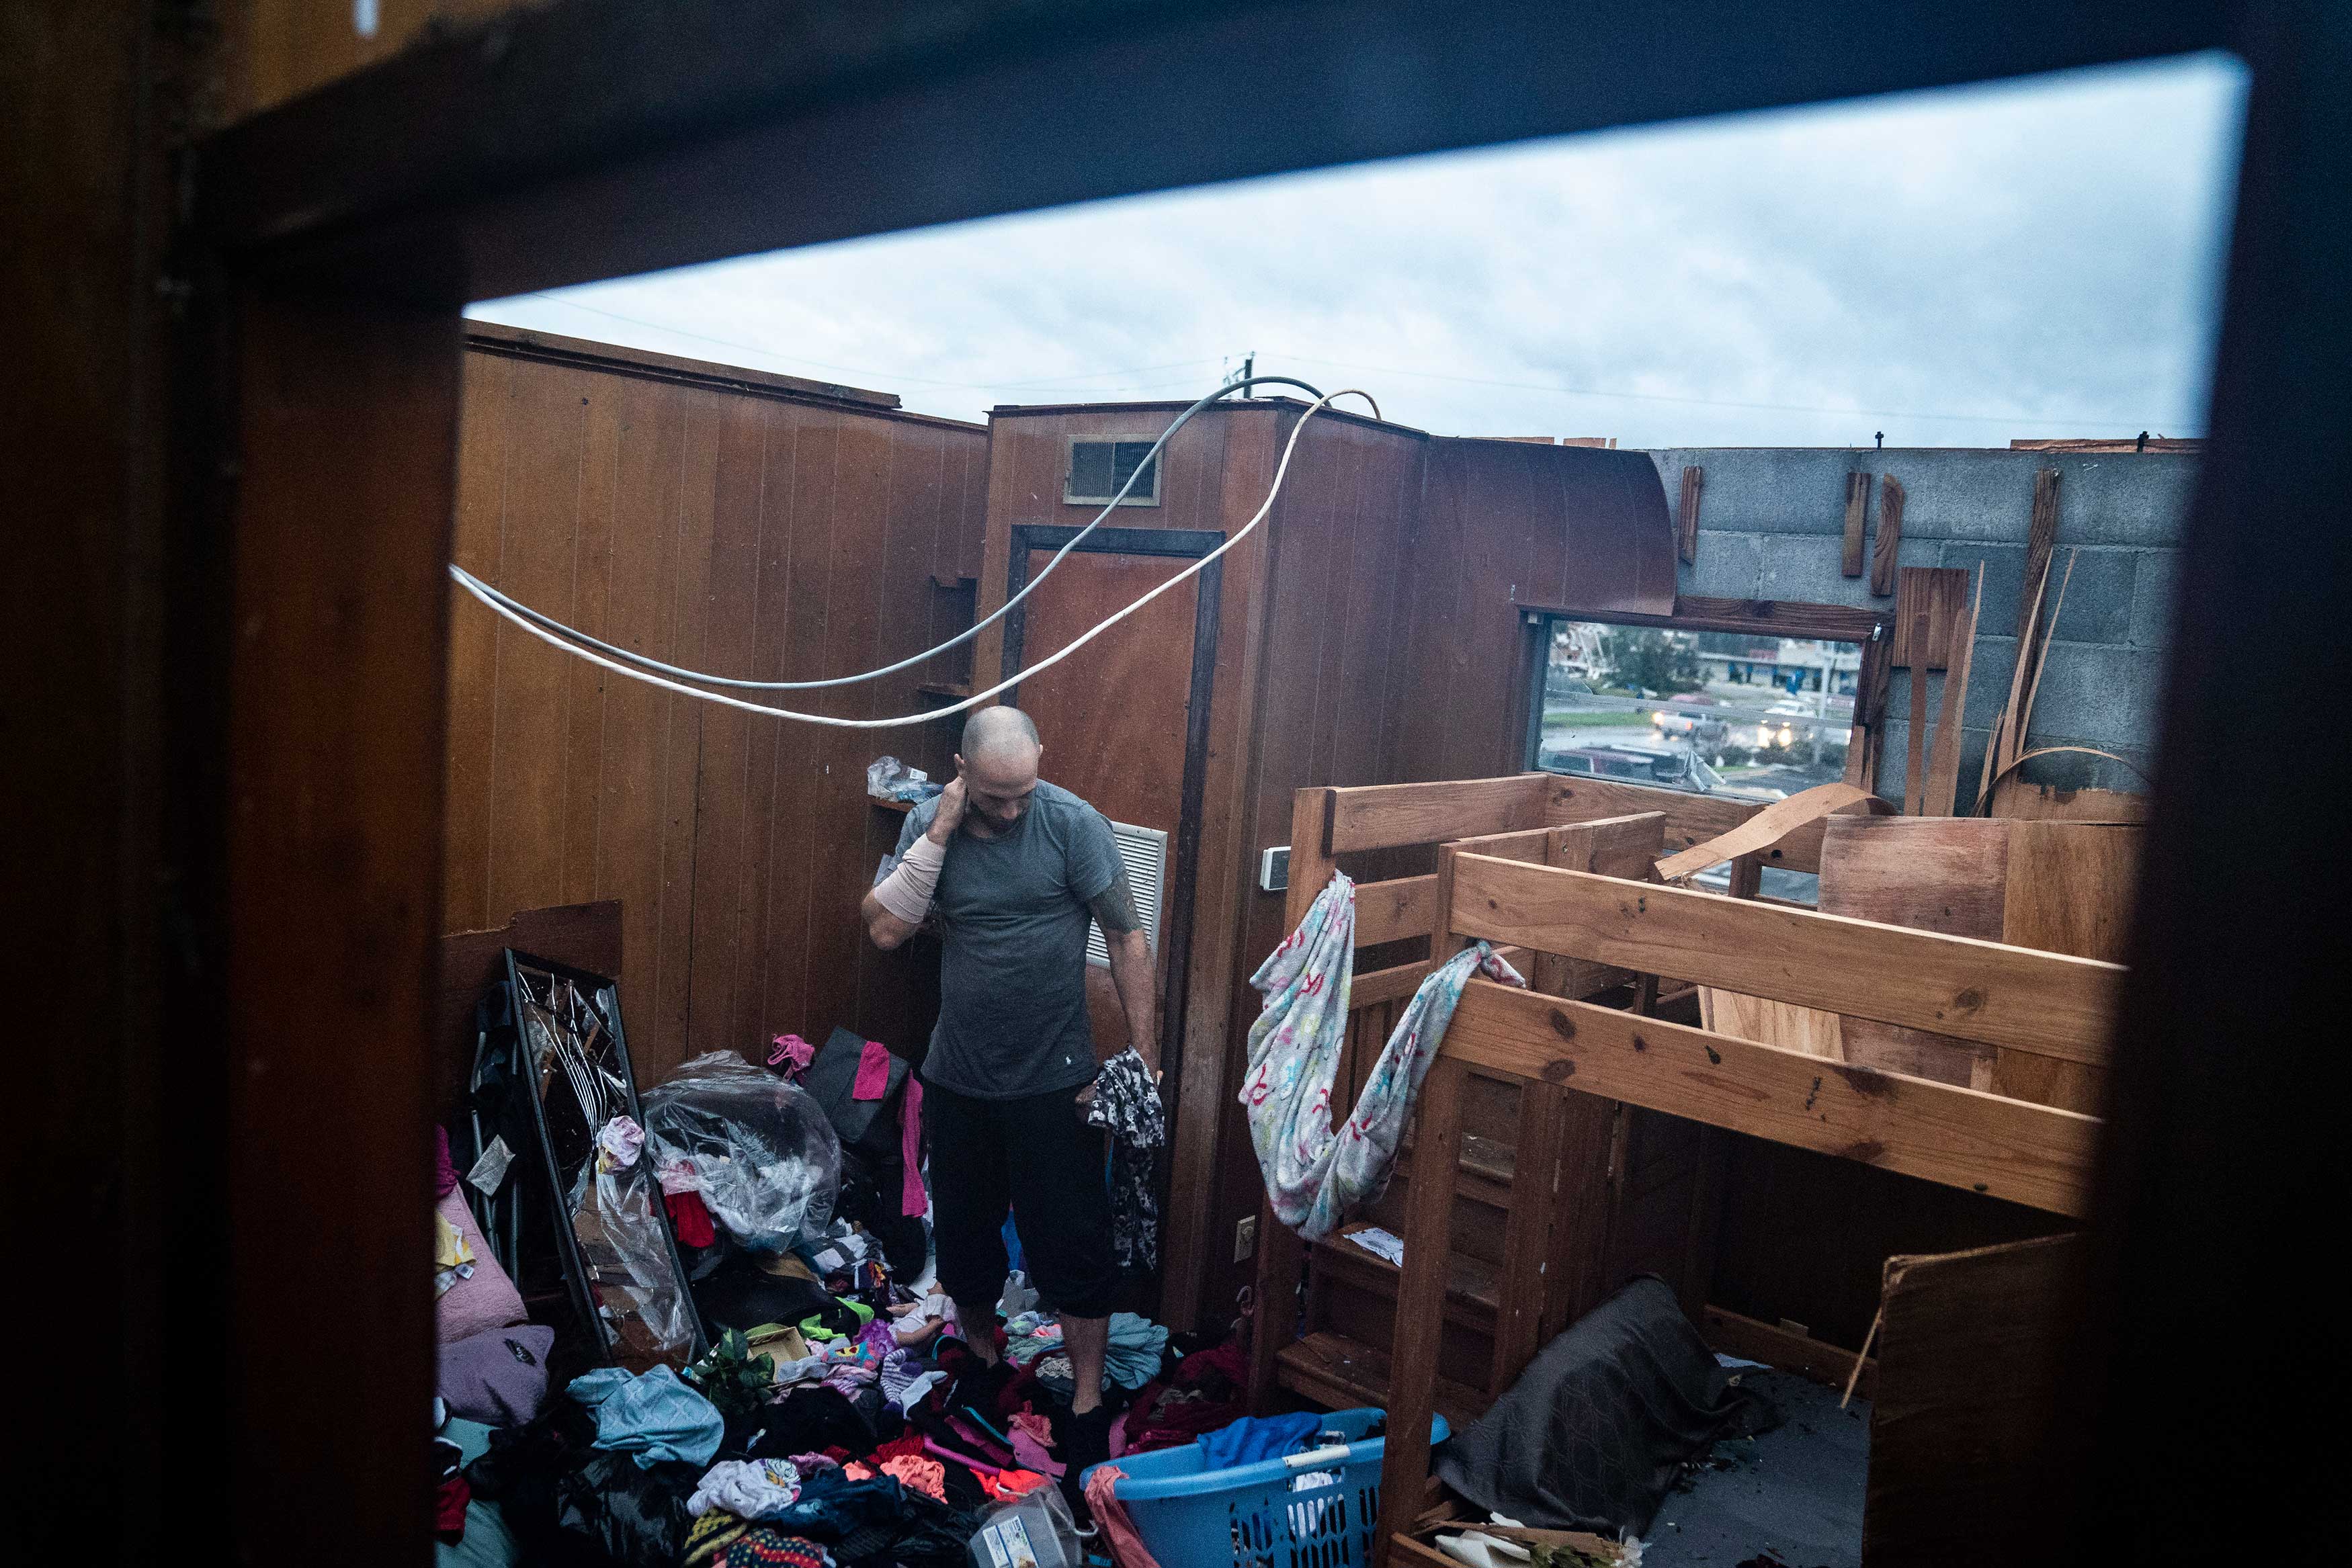 Jason Phipps looks through his families roofless apartment after category 4 Hurricane Michael made land fall along the Florida panhandle, on Oct. 10, 2018 in Panama City, Fla. (Jabin Botsford—The Washington Post/Getty Images)